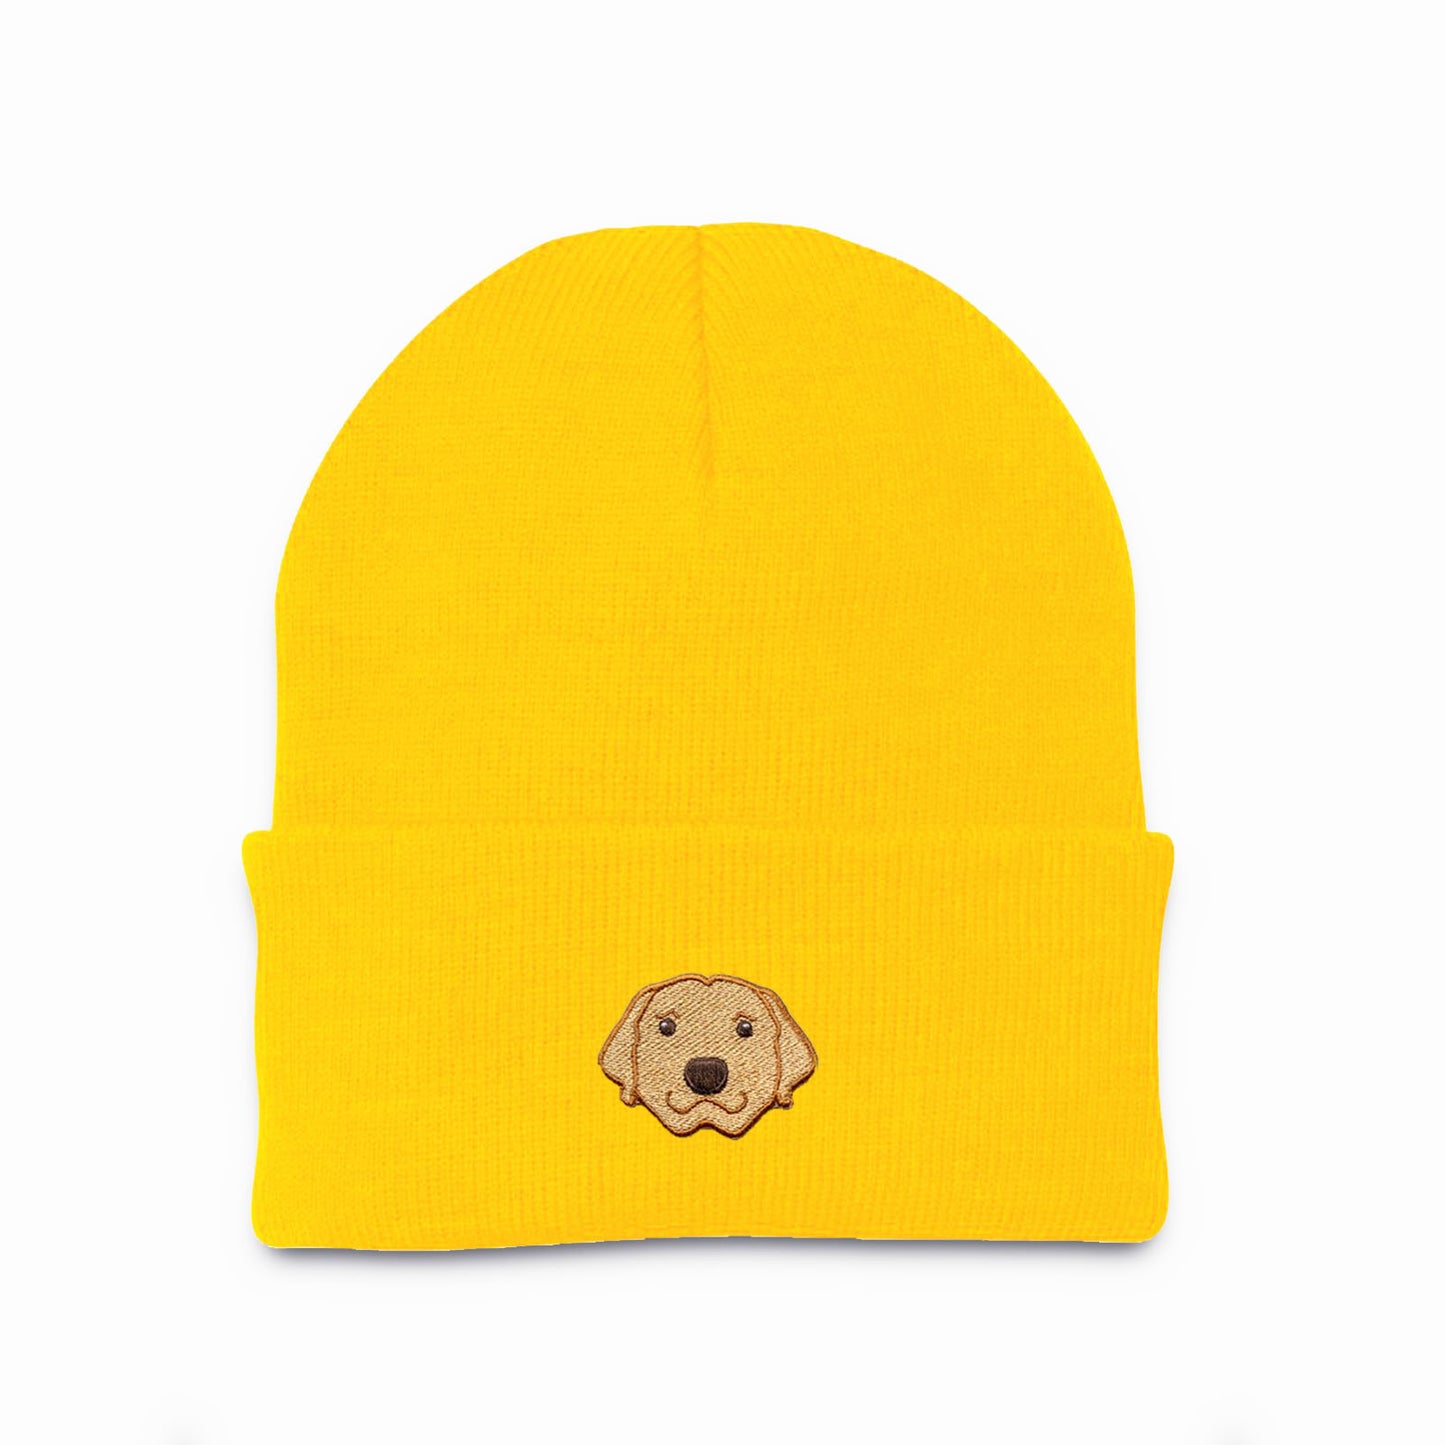 Gold Custom Dog beanie personalized and embroidered on the front.